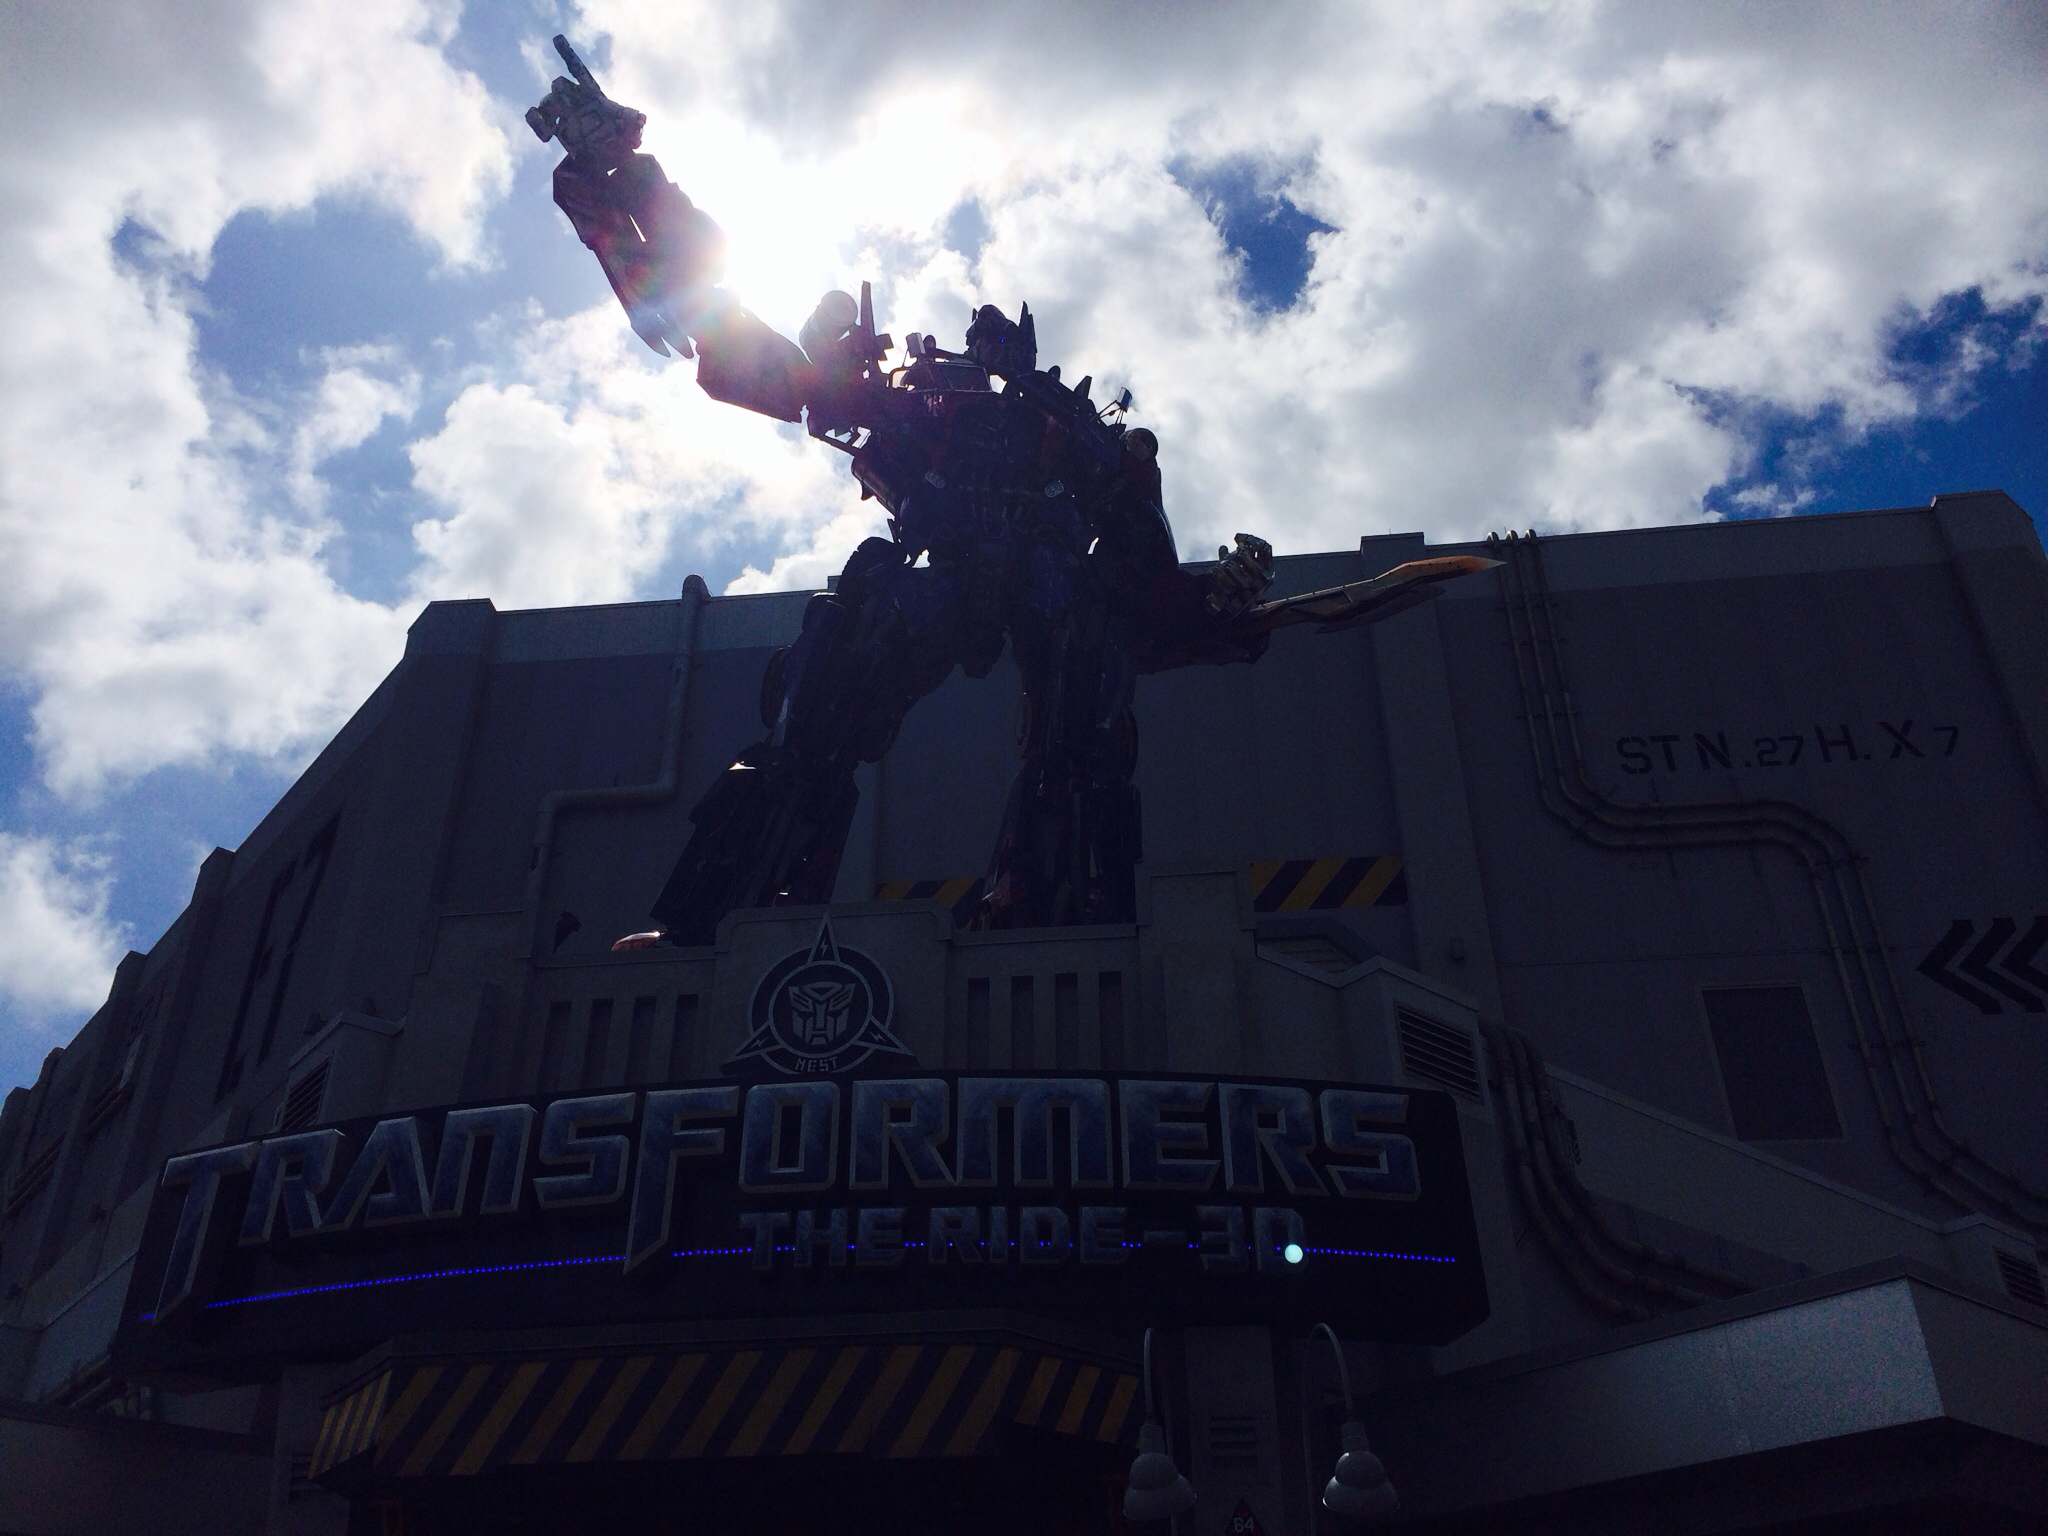 transformers ride at Universal 